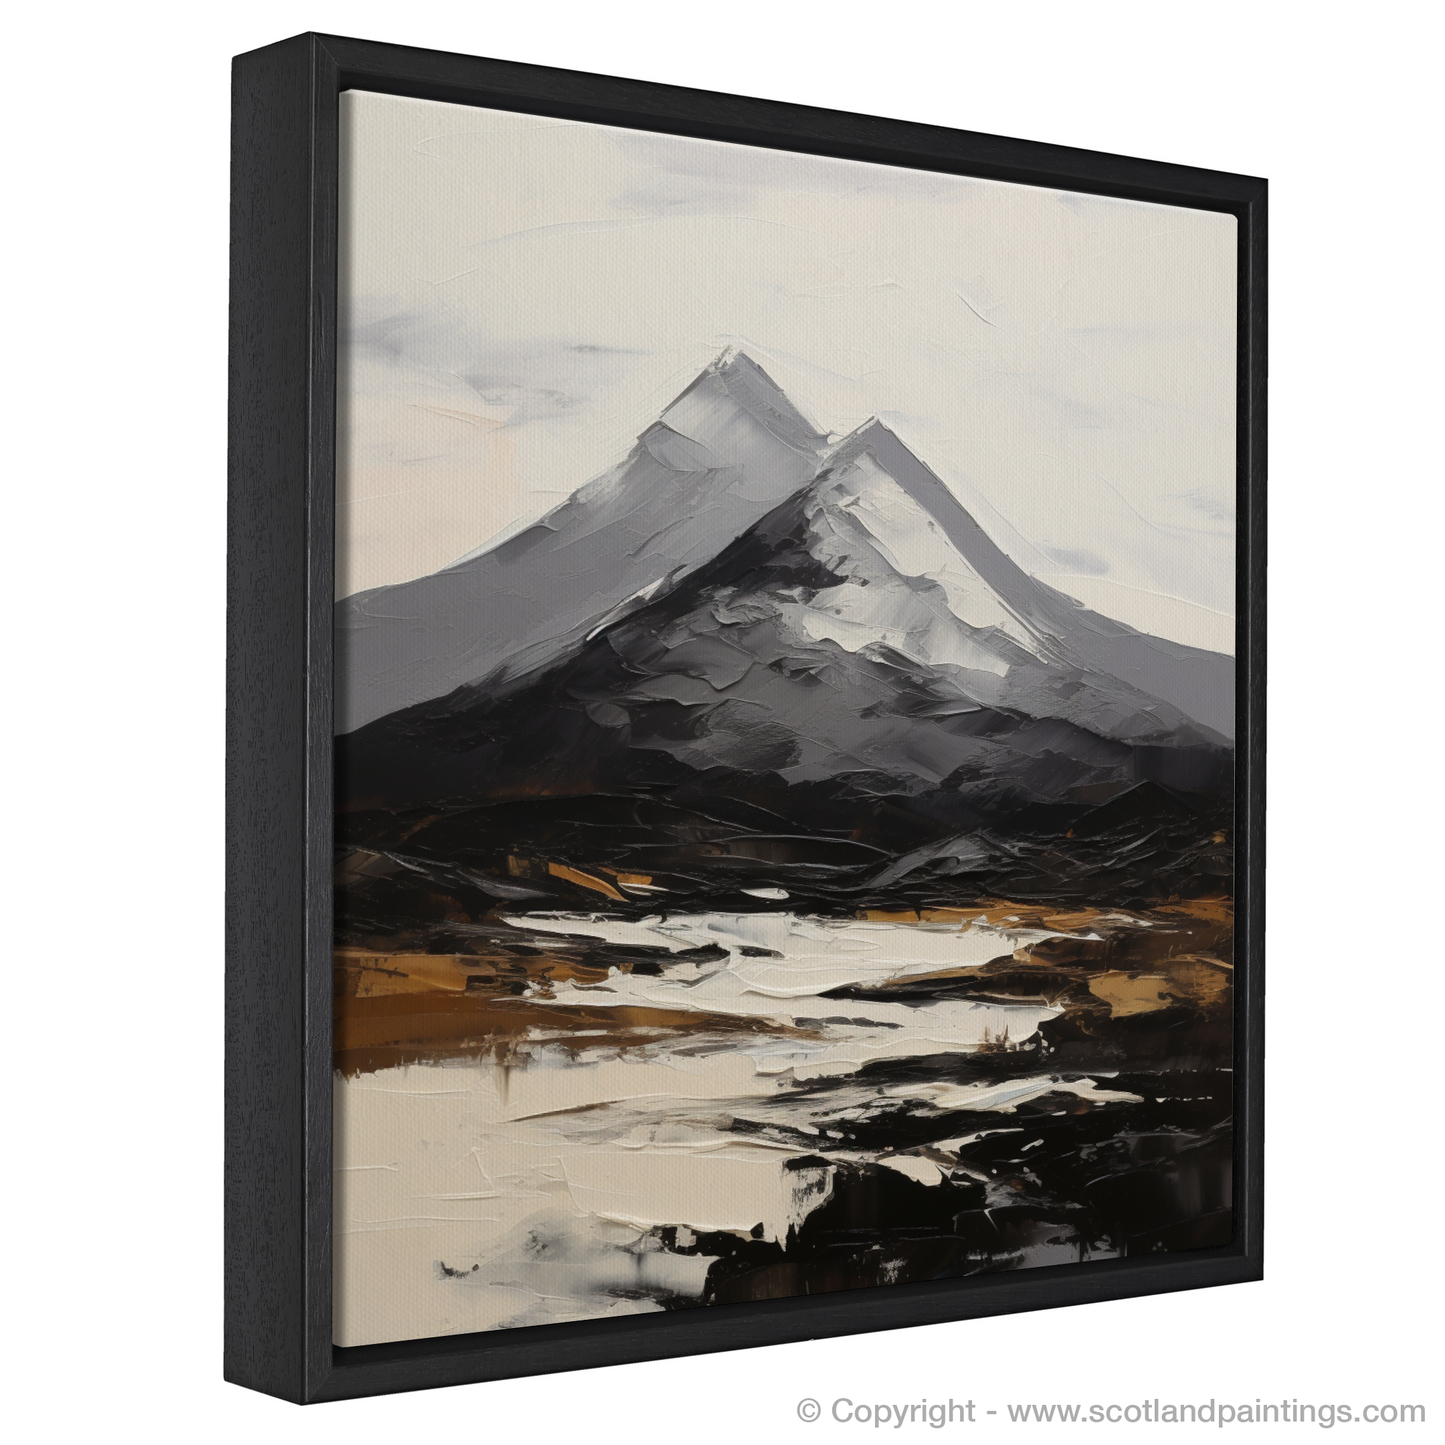 Painting and Art Print of Ben More entitled "Majestic Ben More: An Expressionist Ode to Scotland's Wild Soul".